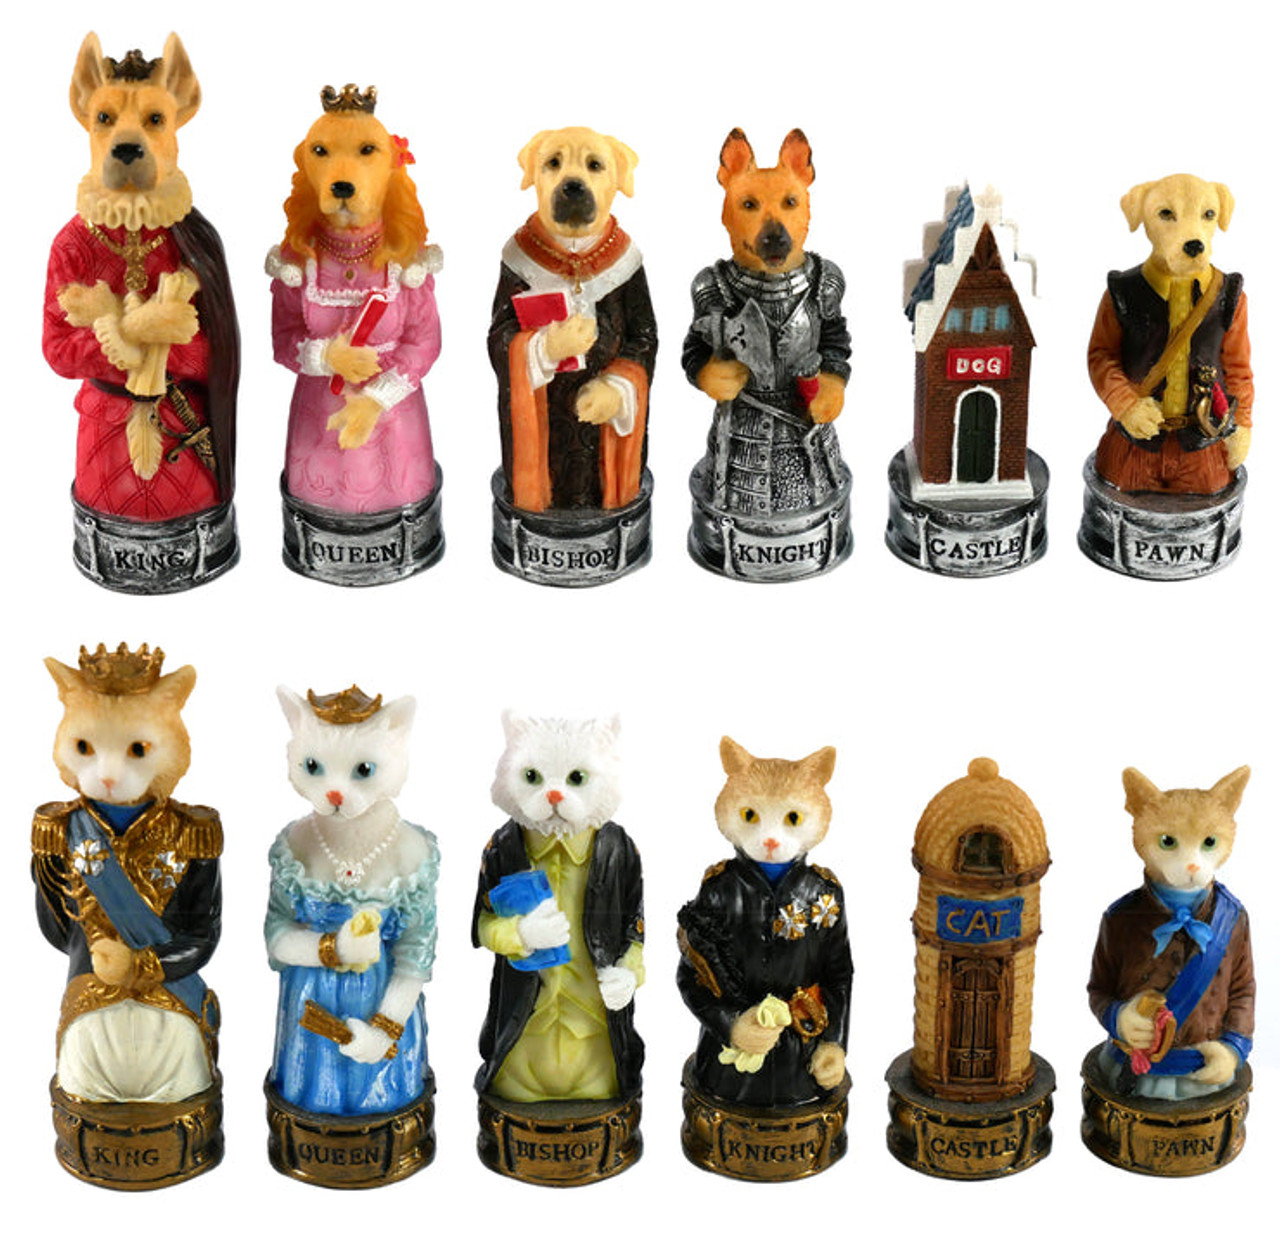 Cats vs. Dogs - Resin Chess Pieces 3.25" King